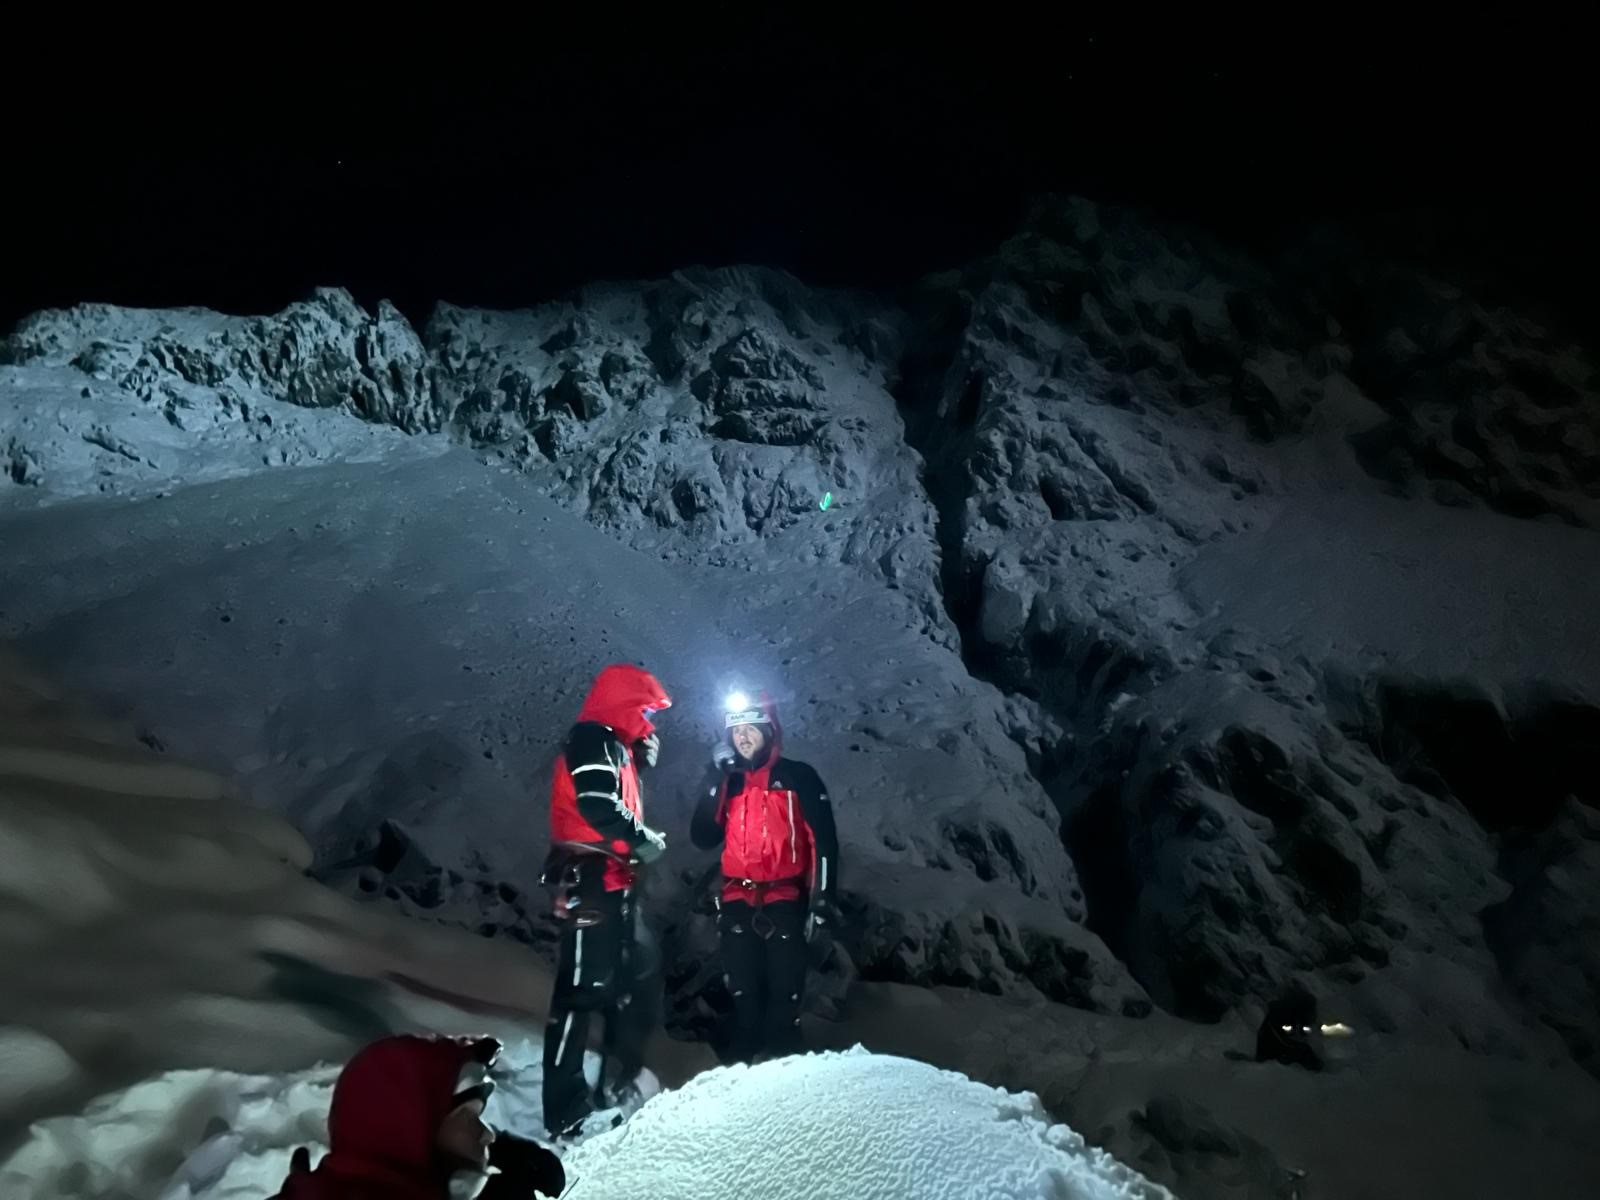 Two team members at night in the snow